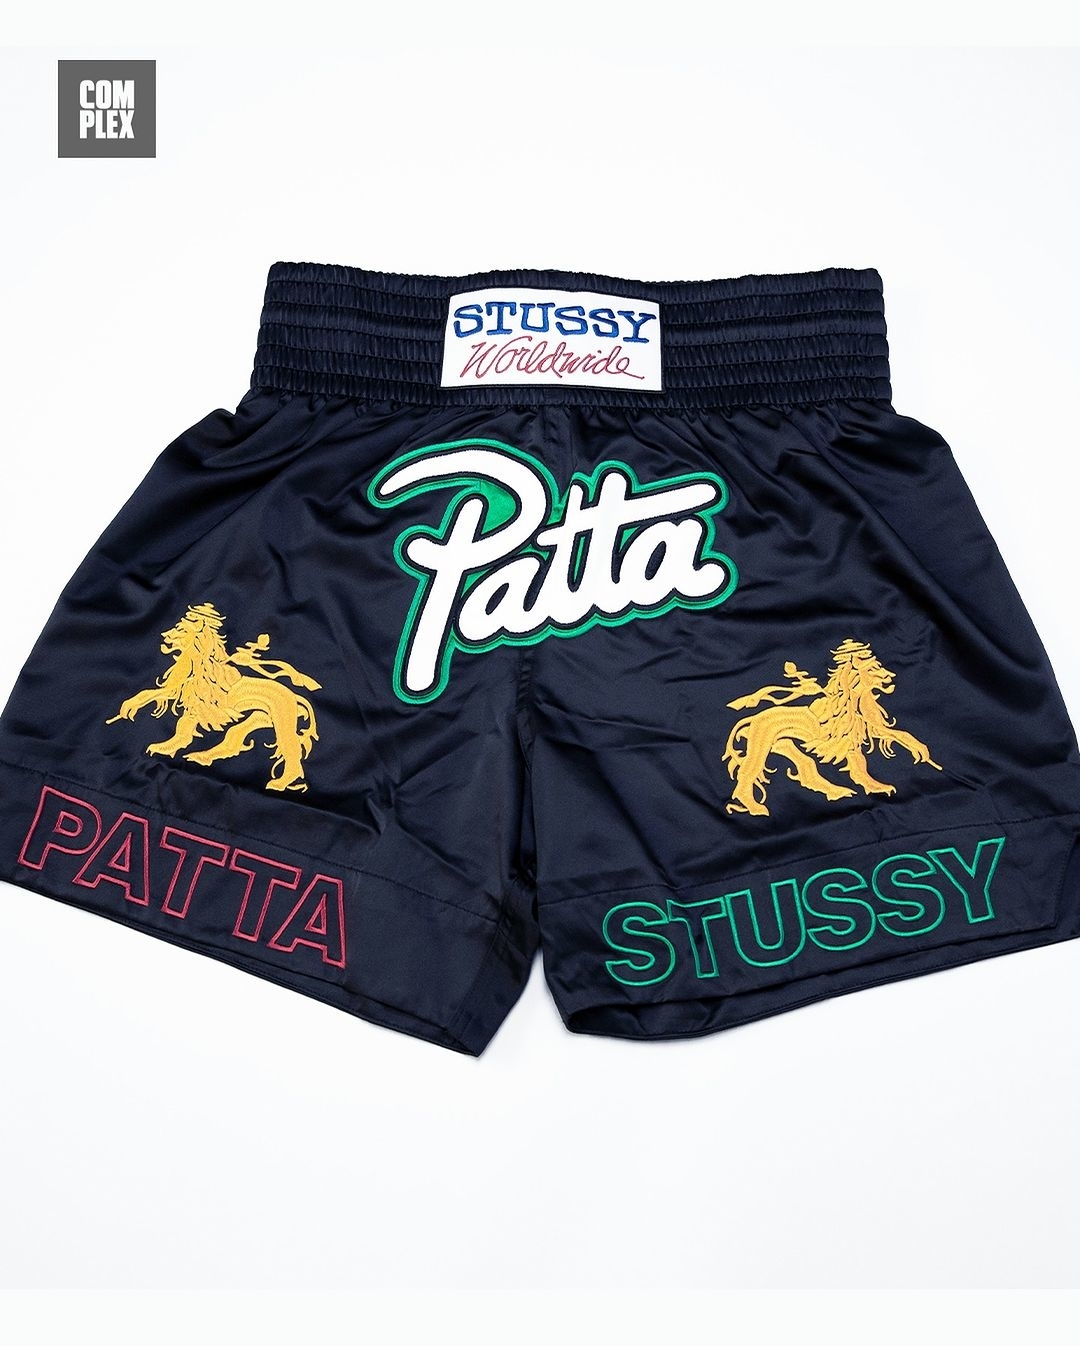 10 New Releases Worth Buying This Week: Patta x Stüssy